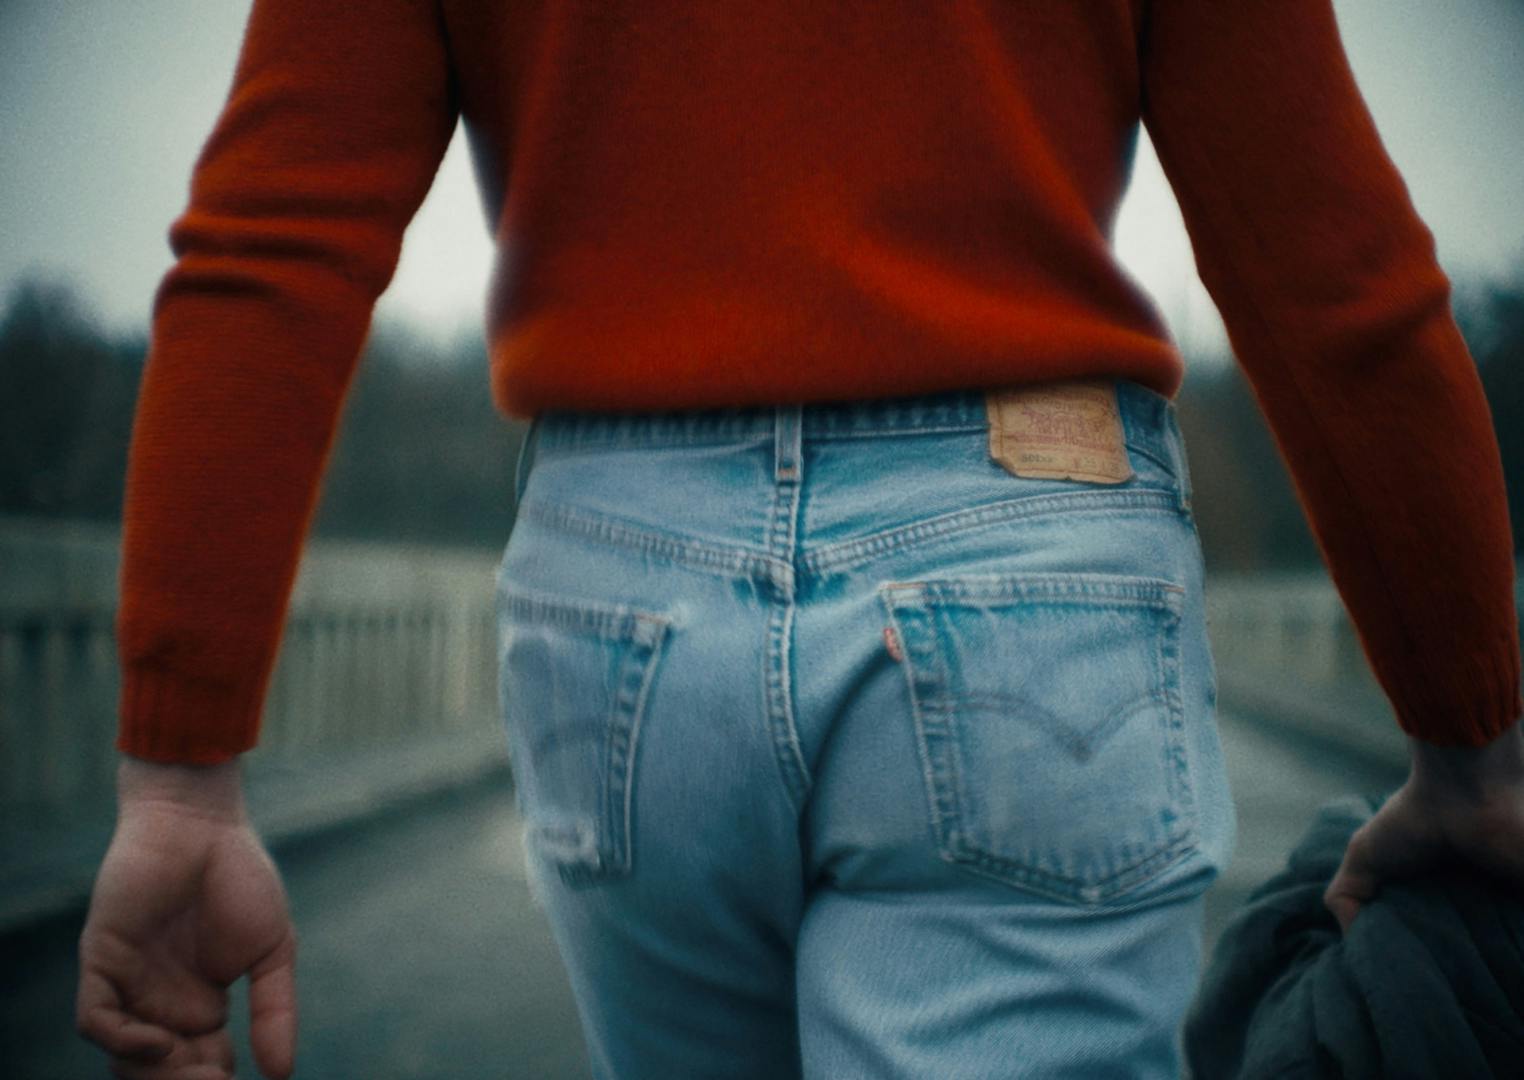 Image shows a person from behind wearing a pale blue pair of Levis 501 jeans and a red sweater